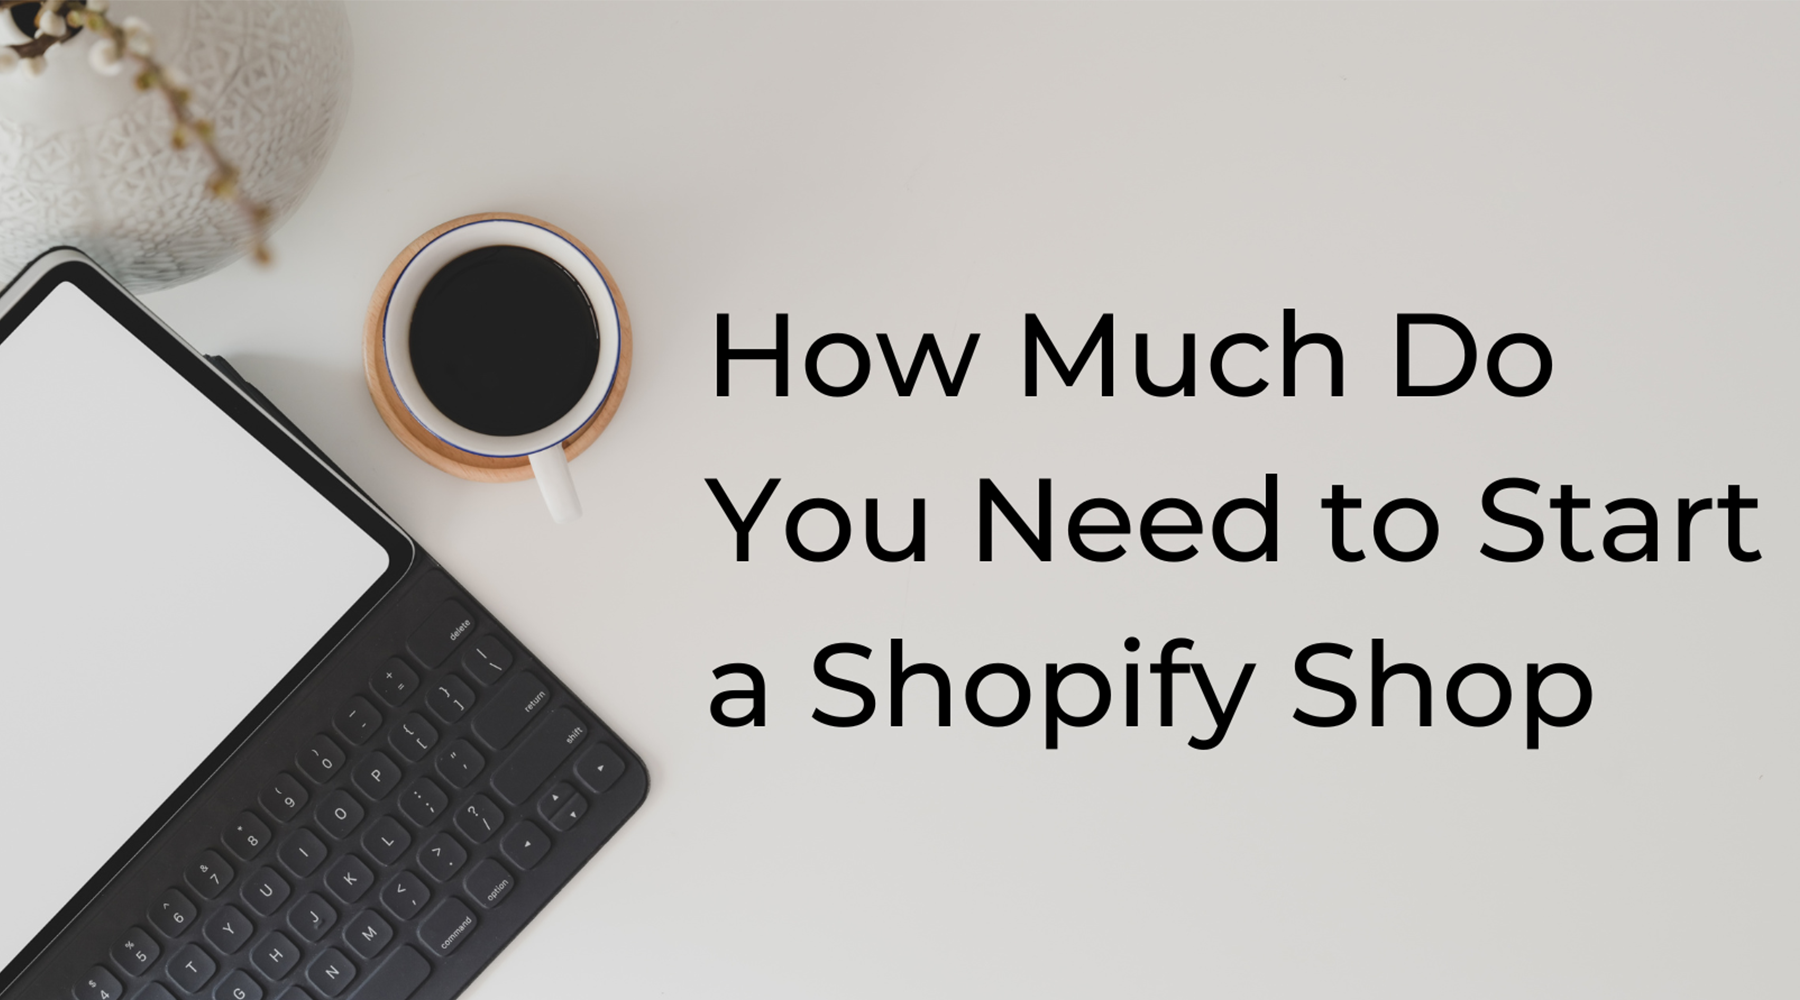 Shopify Costs: How Much Do You Need to Start a Shopify Store?